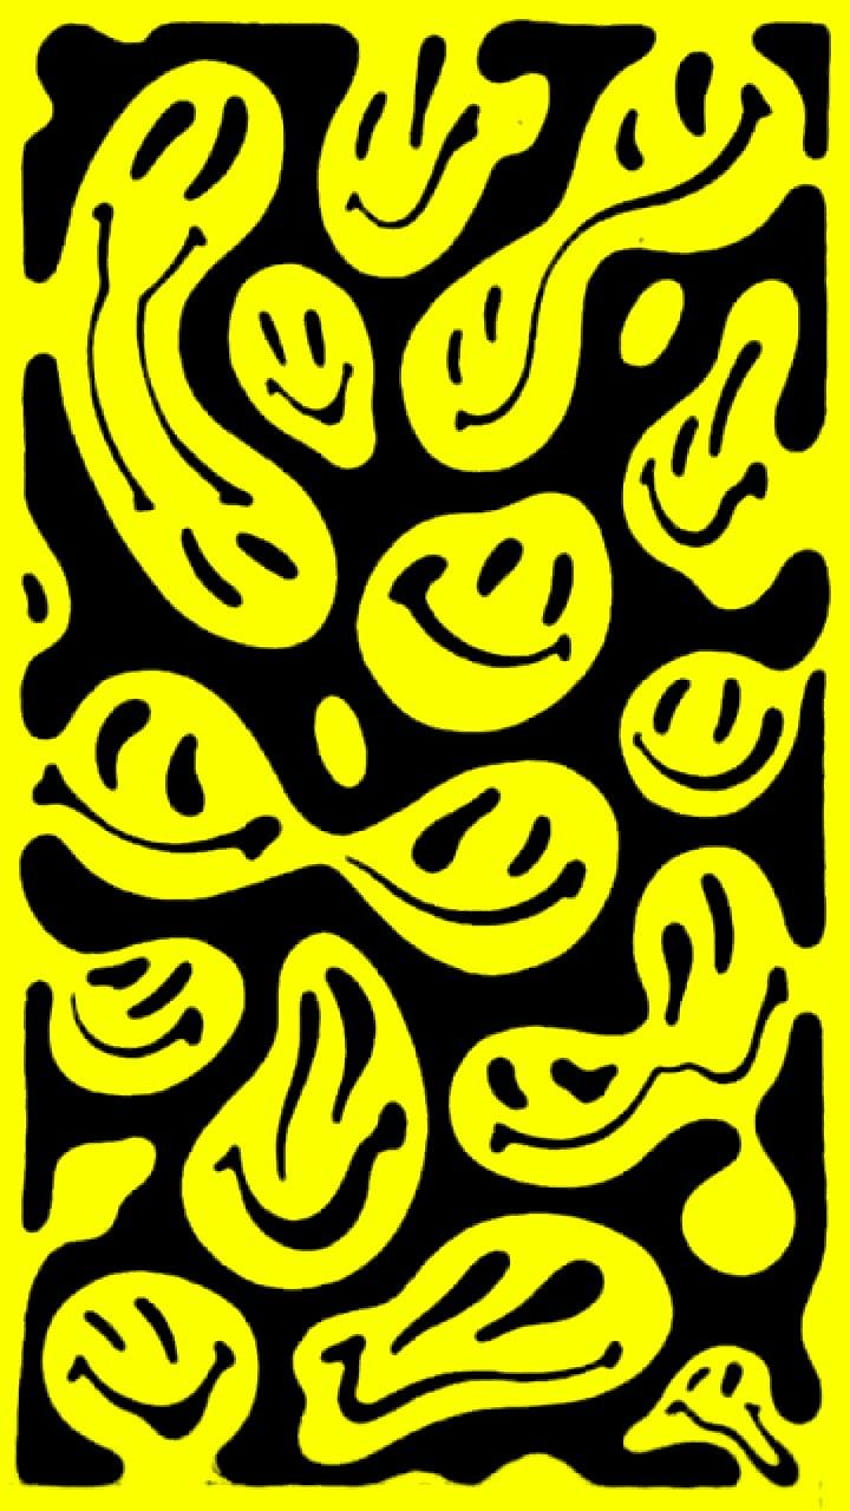 Buy Drippy Smiley Face Wallpaper Online In India  Etsy India